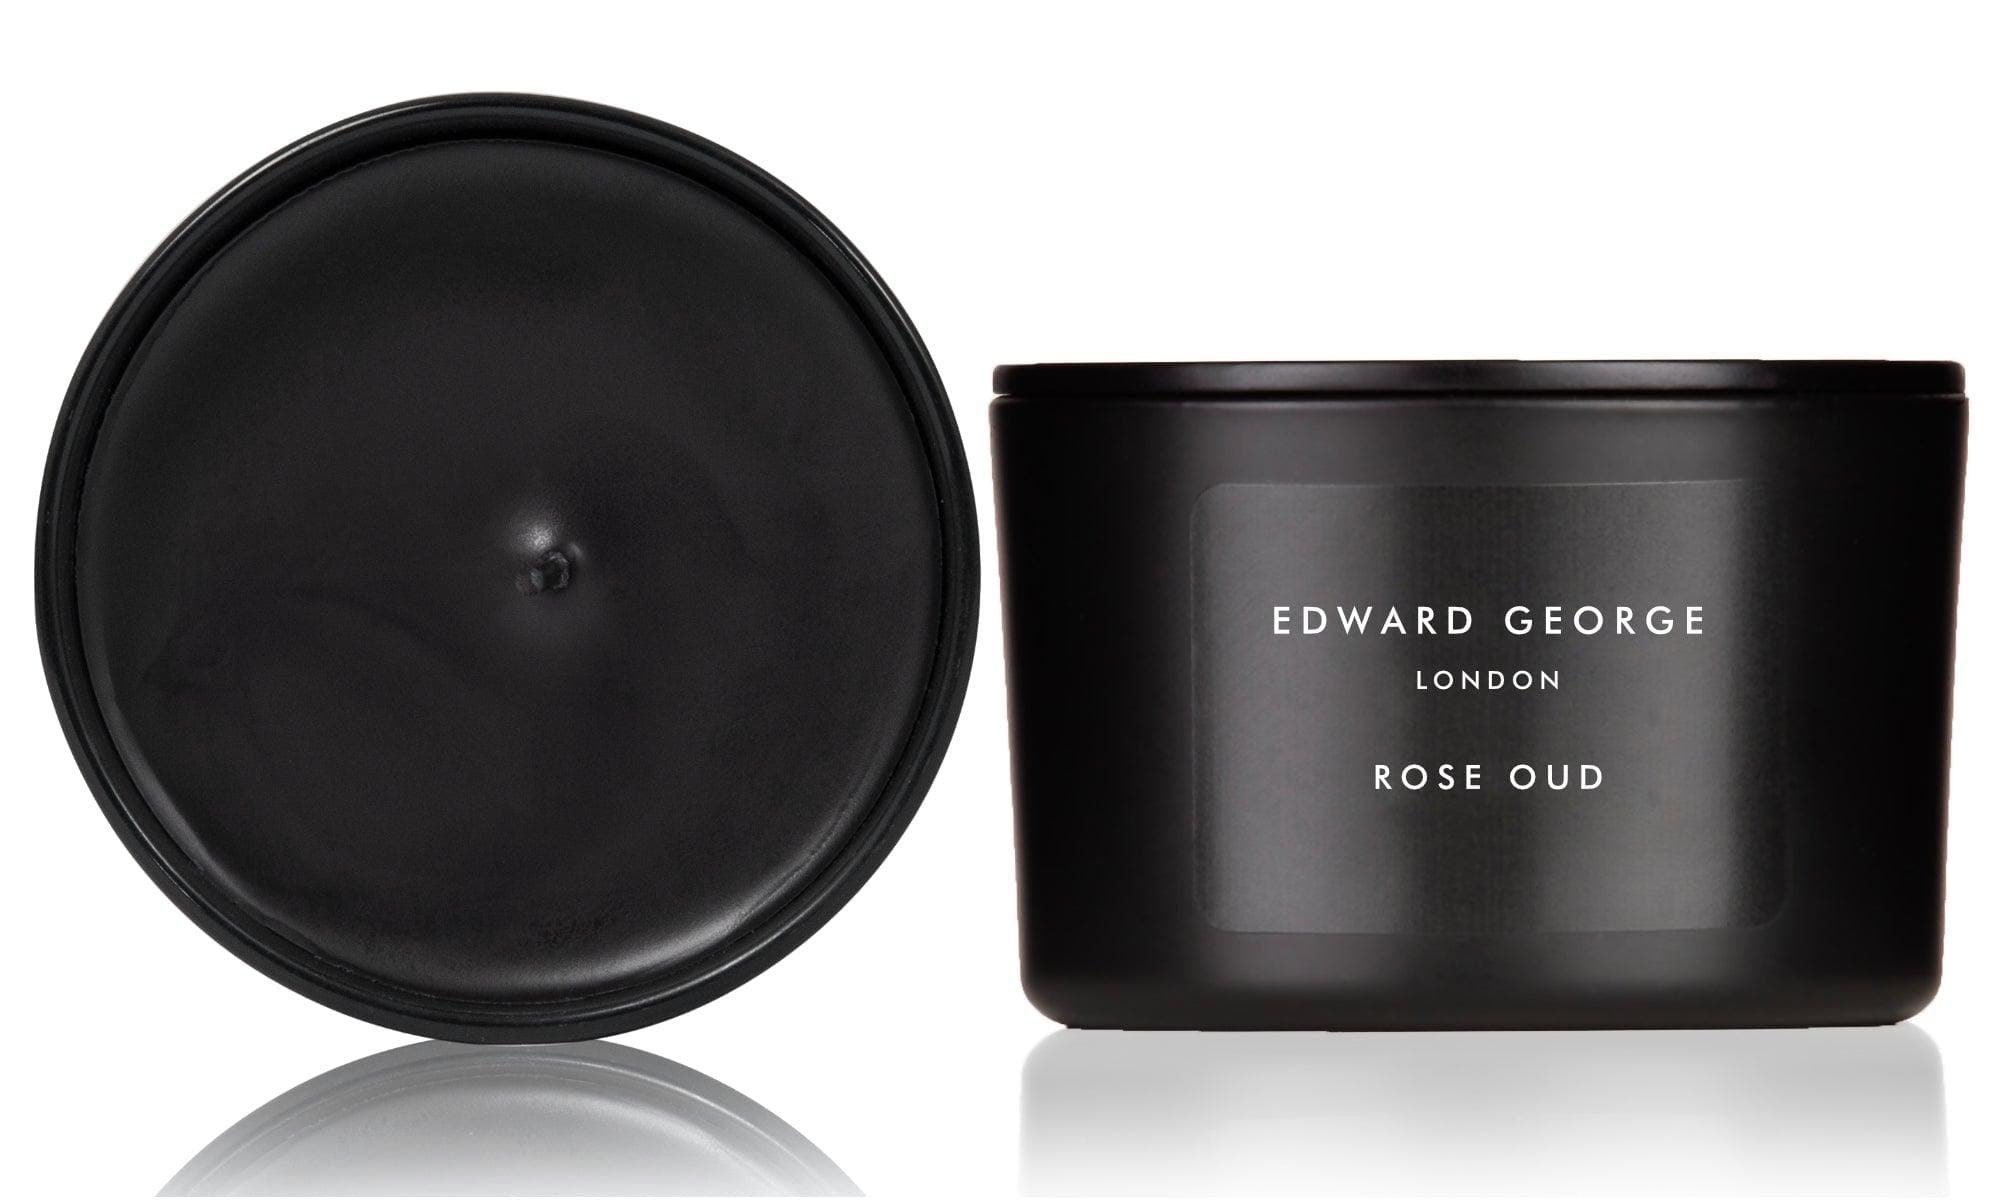 rose oud candles home fragrance decor room living room edward george london luxury gift ritual scent set lid zinc alloy black wax best black scented candle women men small